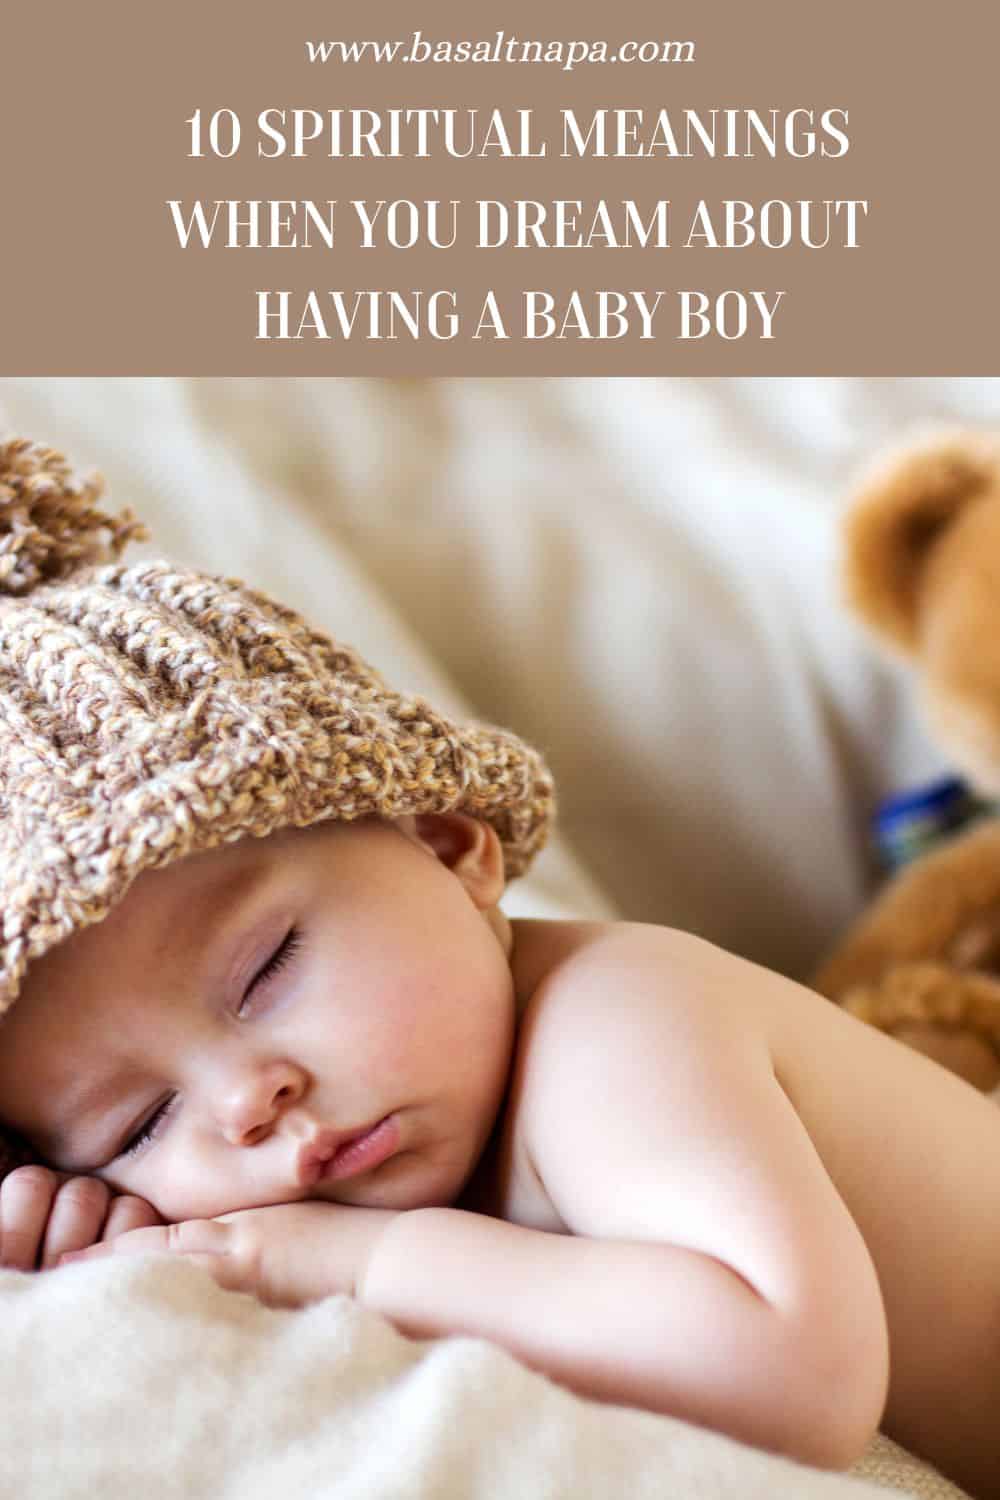 What Does It Mean When You Dream About Having A Baby Boy